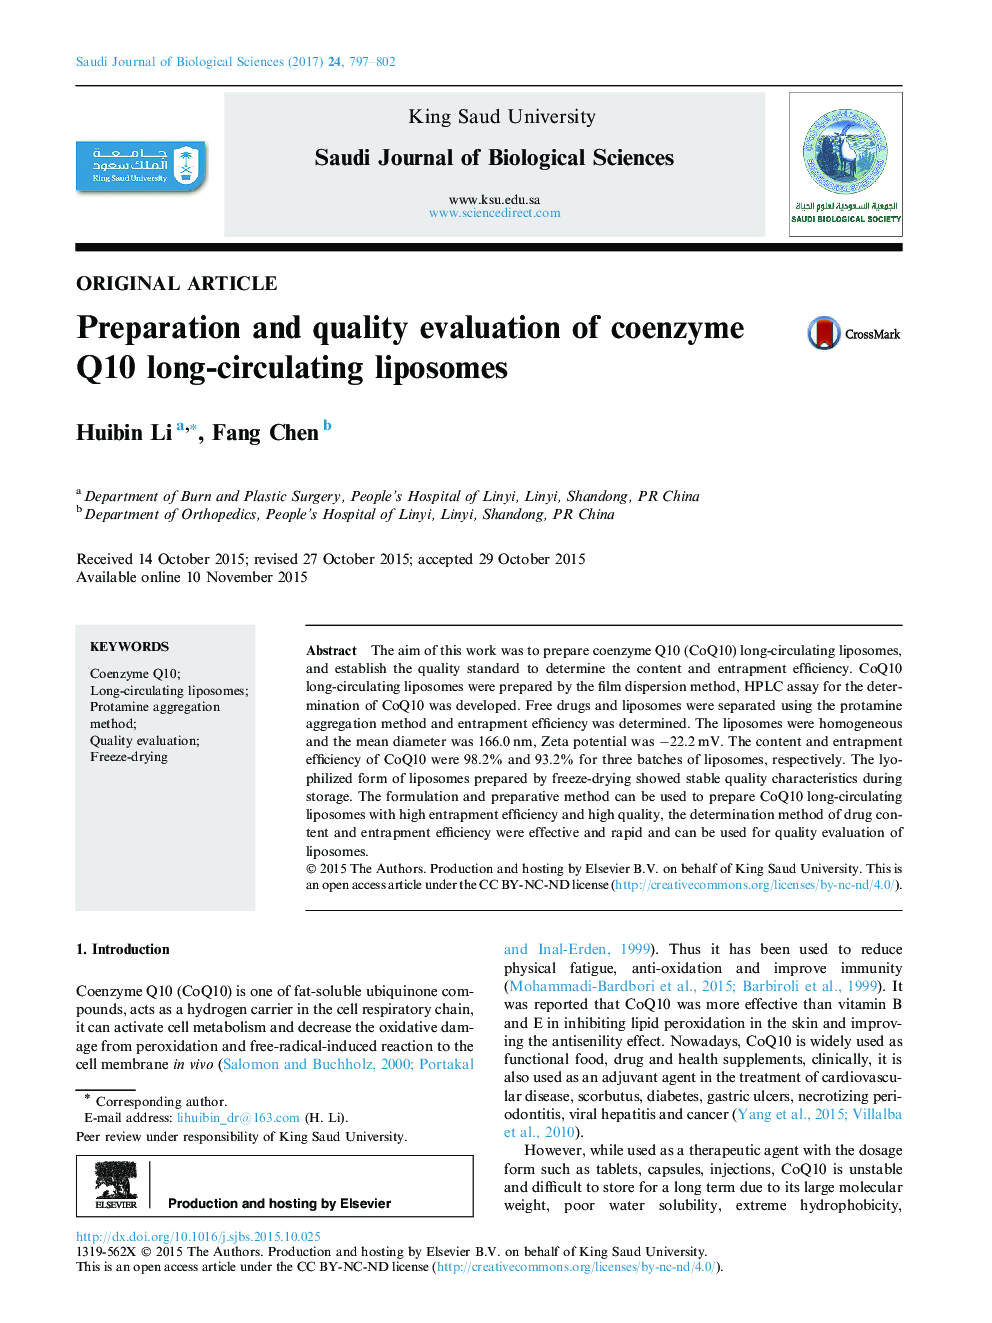 Original articlePreparation and quality evaluation of coenzyme Q10 long-circulating liposomes